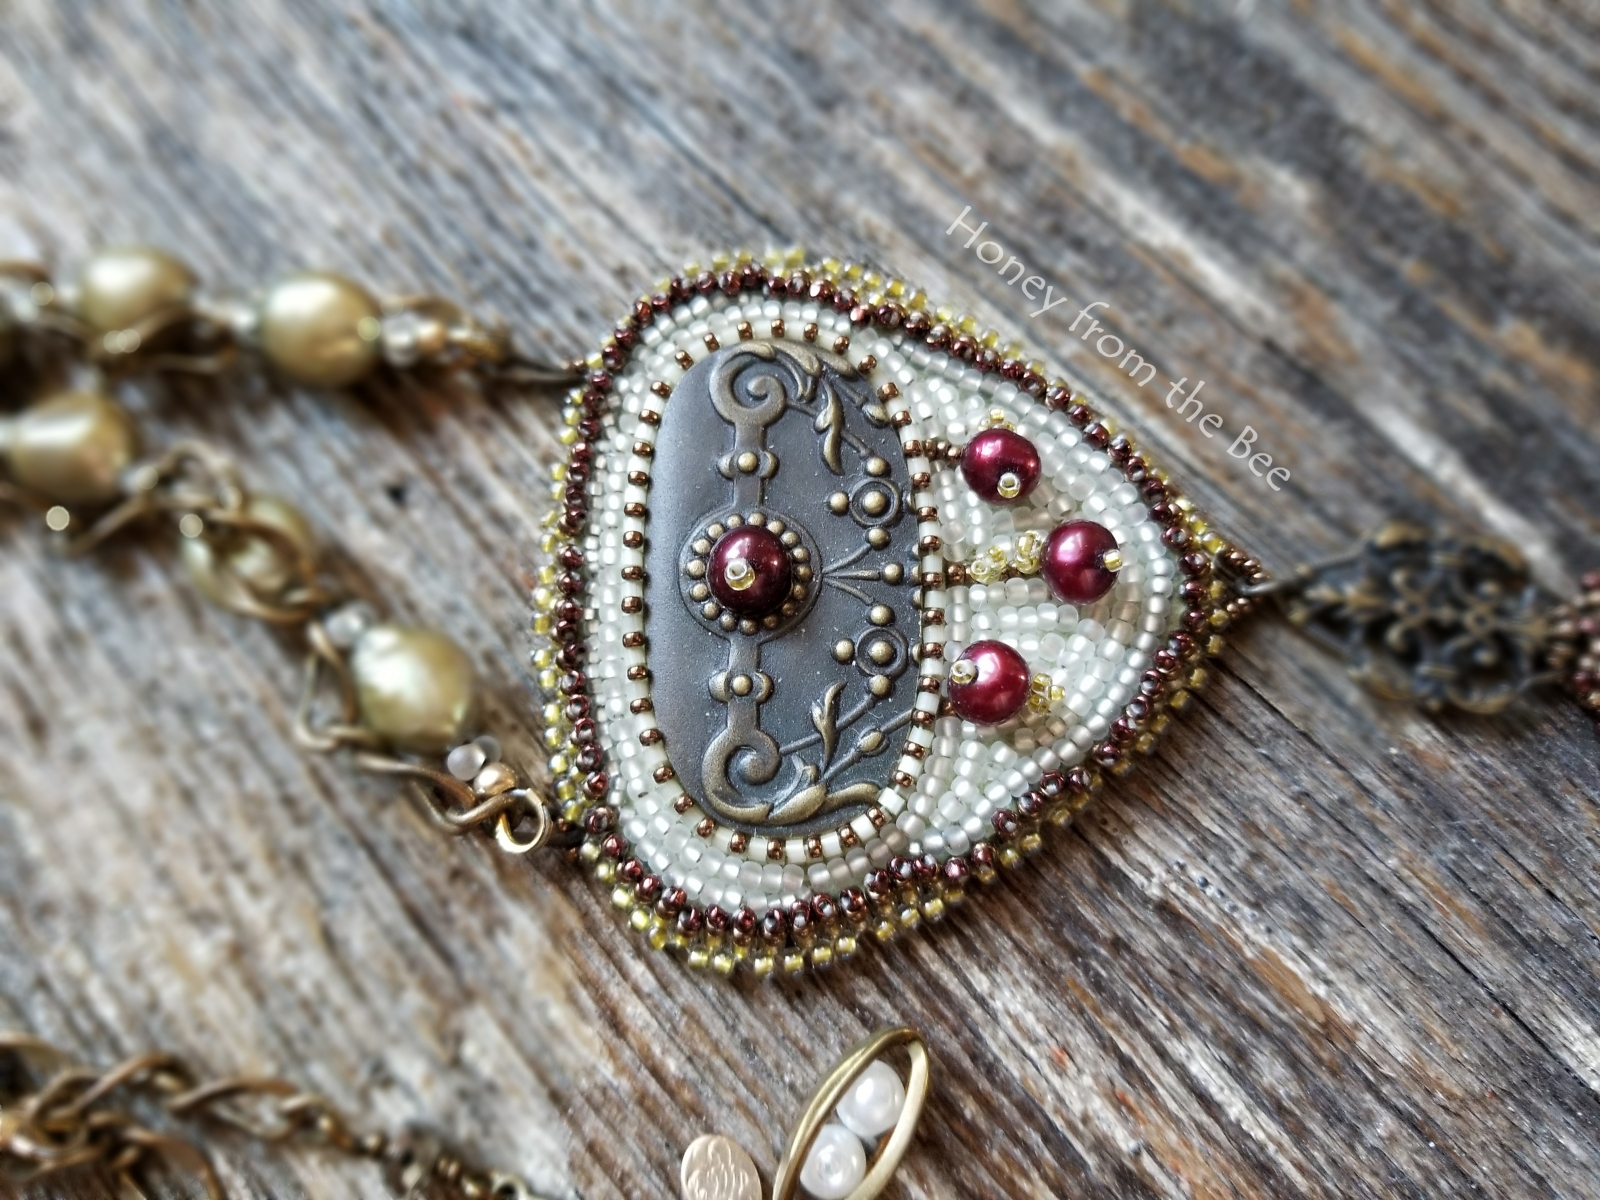 Bead embroidered statement necklace by Honey from the Bee